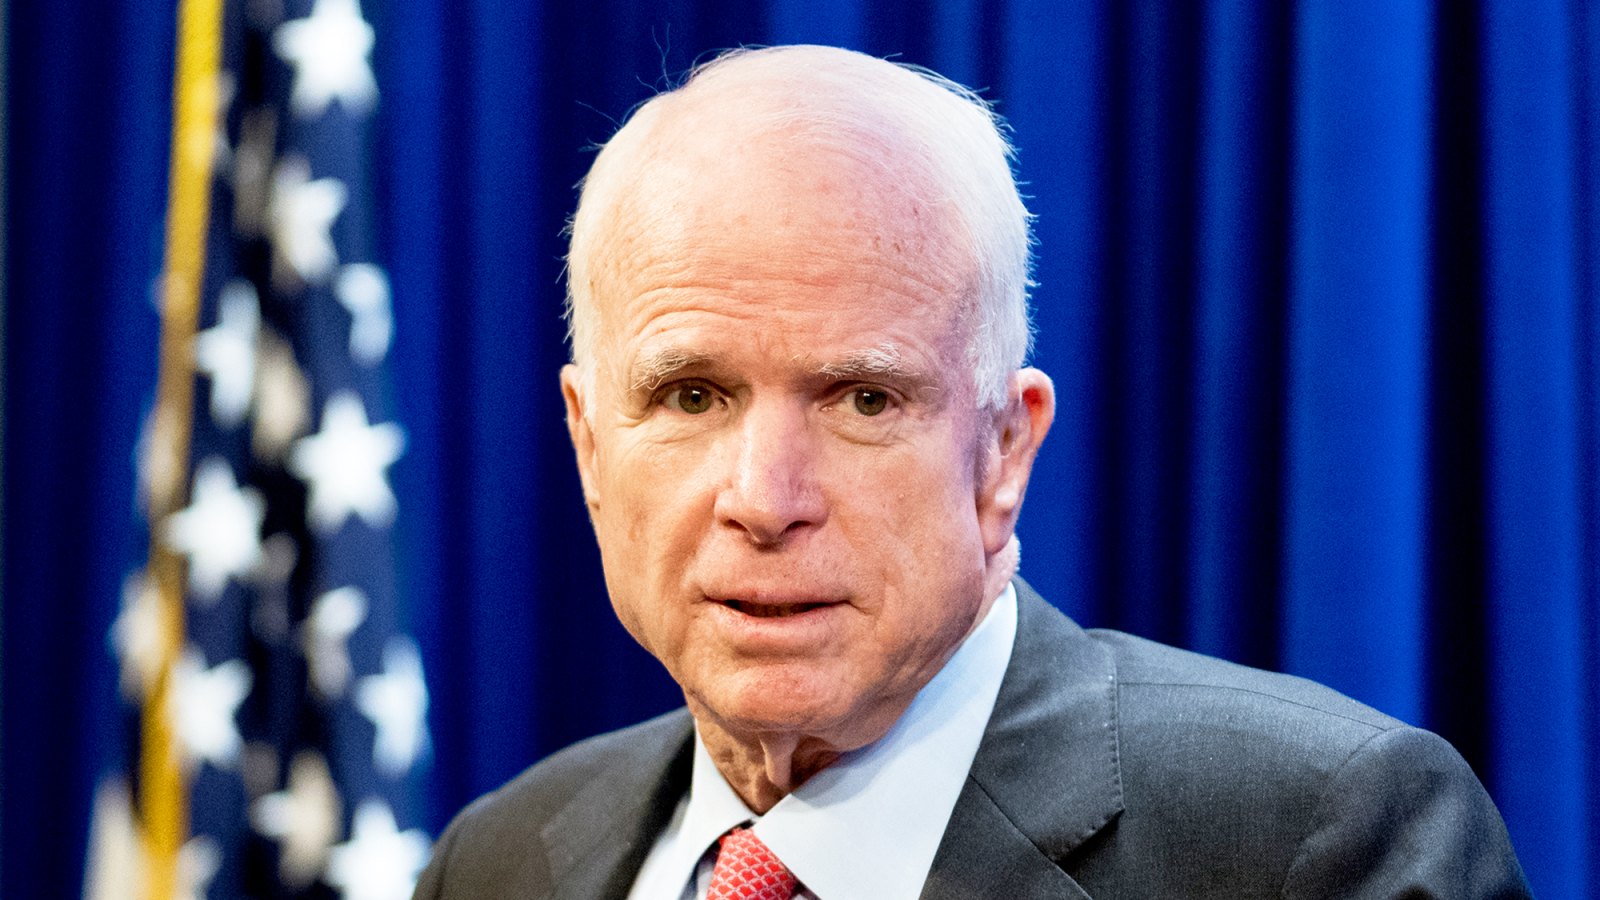 John McCain attends the Heritage Foundation in Washington, D.C. on July 11, 2017.